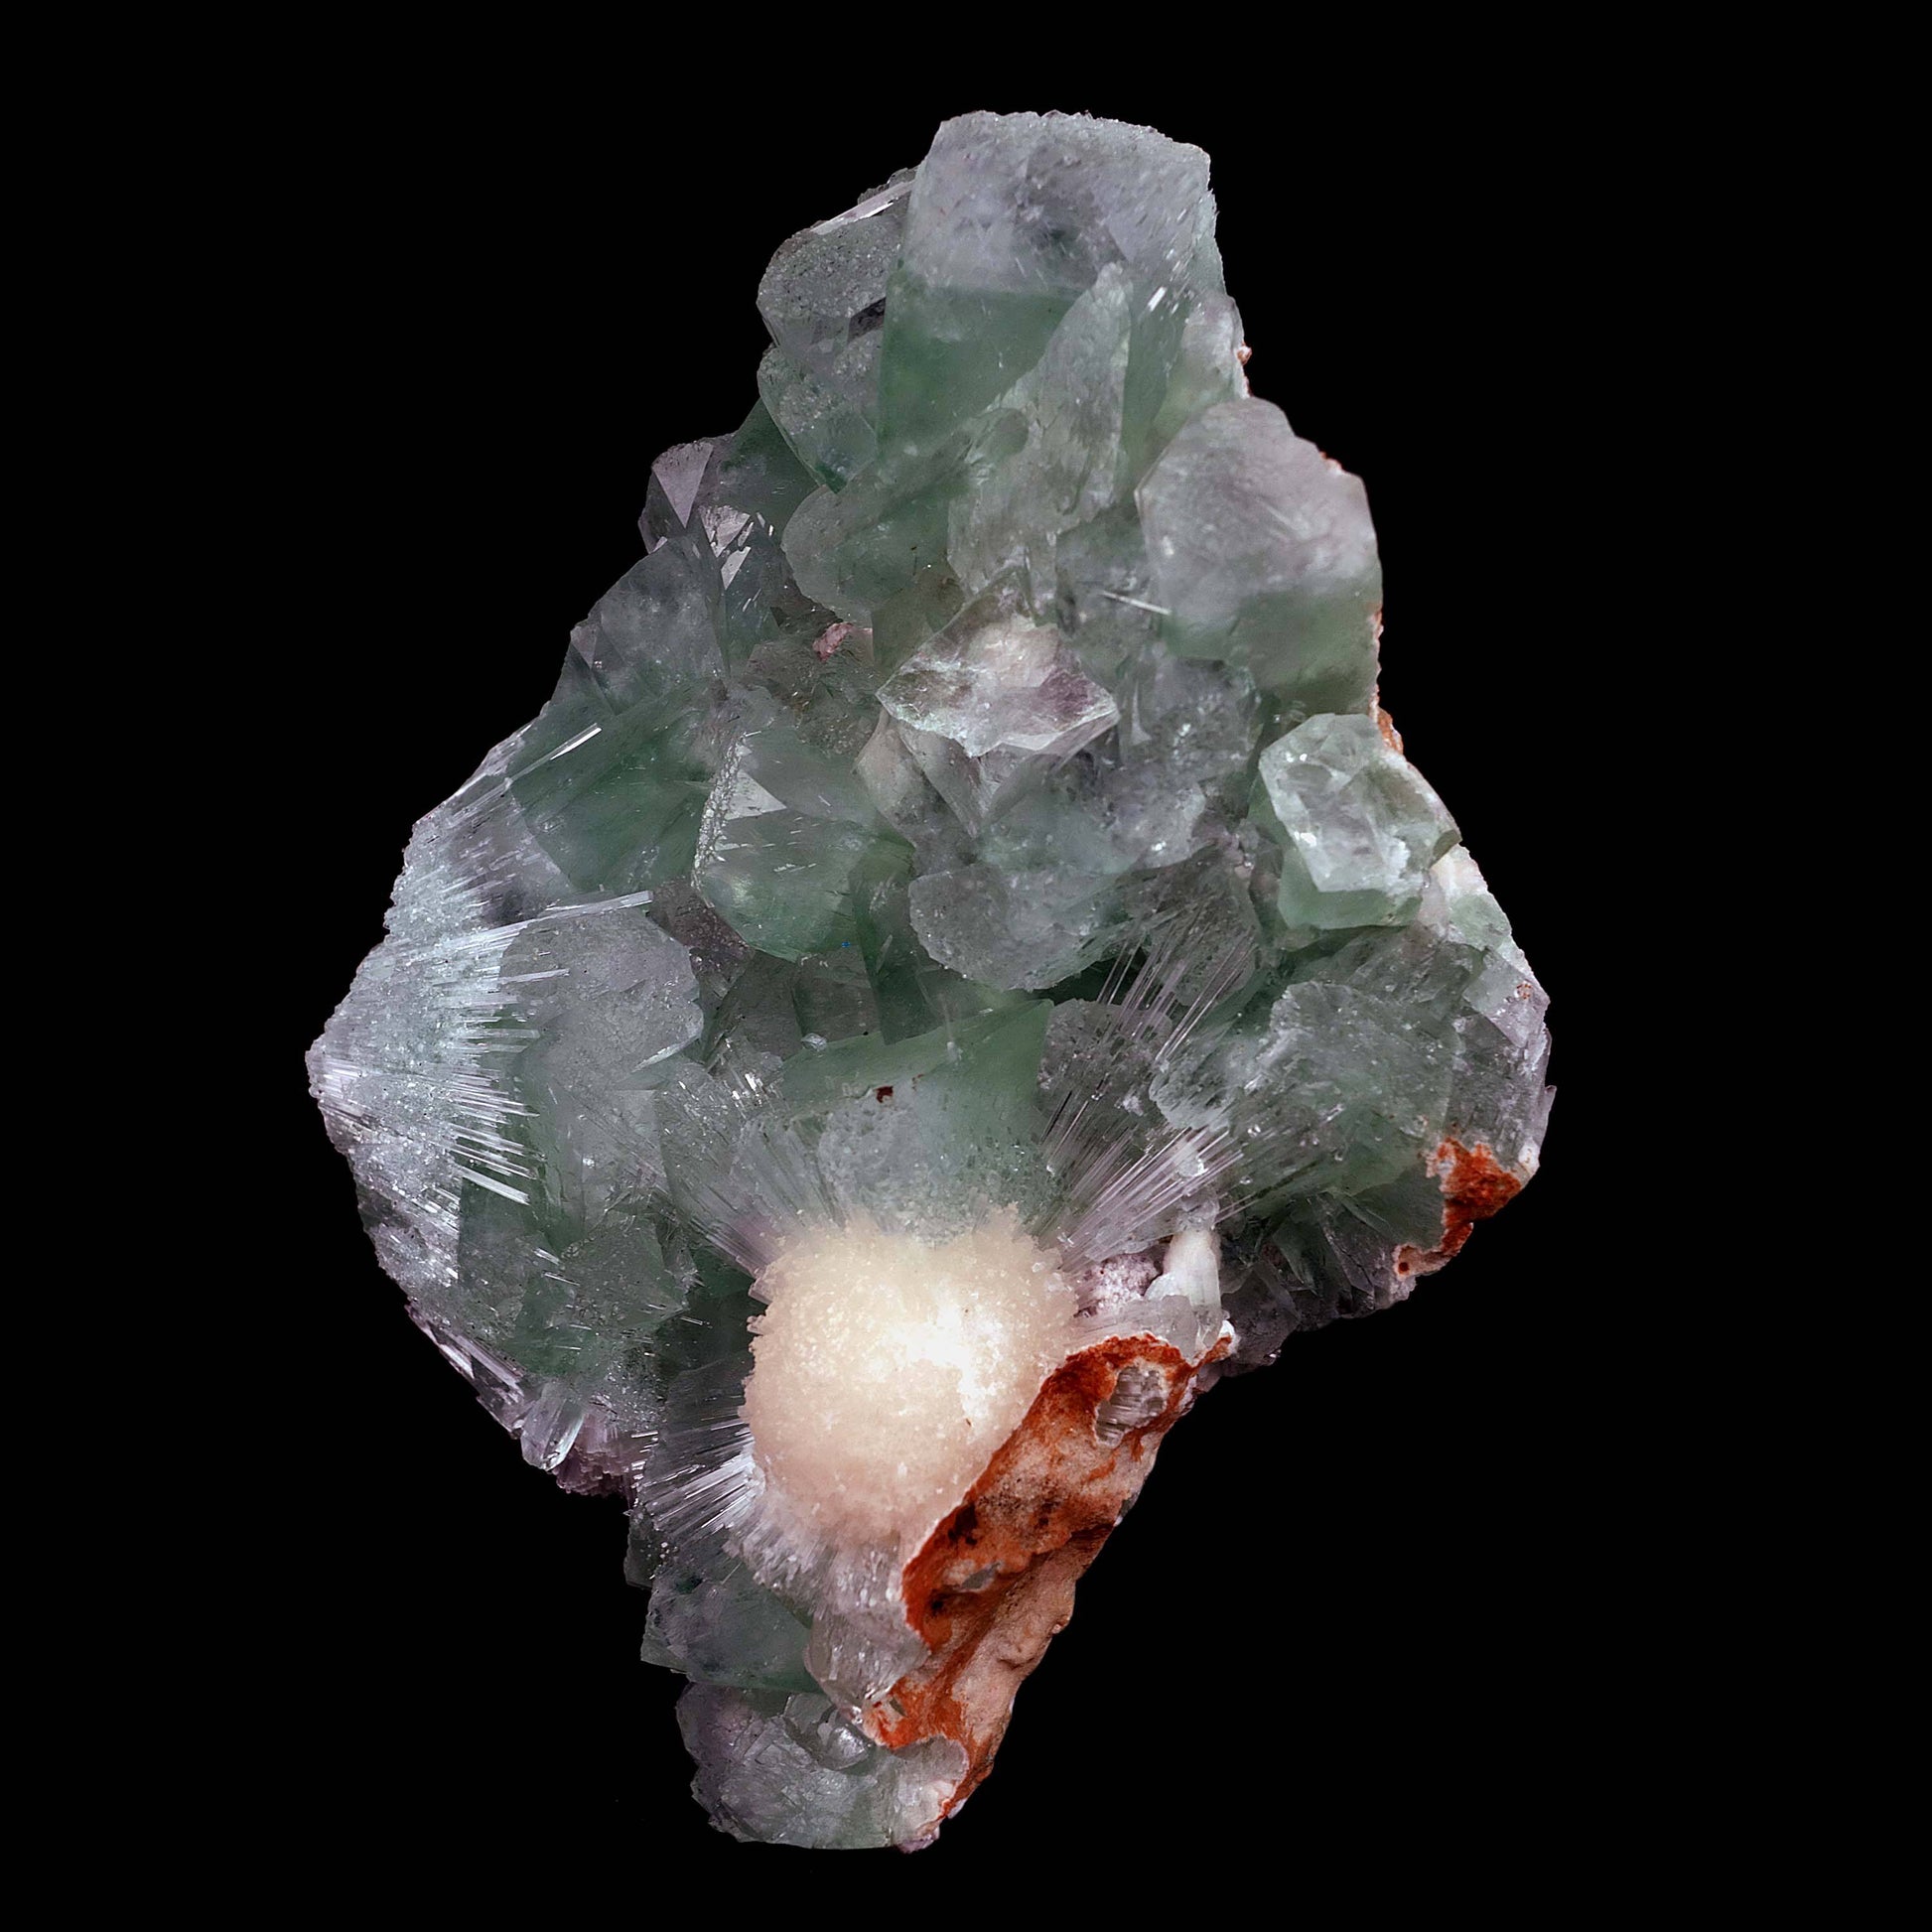 Green Apophyllite Cubical Crystals with Scolecite Natural Mineral Spec…  https://www.superbminerals.us/products/disco-green-apophyllite-with-scolecite-natural-mineral-specimen-b-4006  Features Large lustrous transparent green cubical ball Apophyllite crystals to with elongated lustrous transparent colorless Scolecite sprays. A second generation of smaller water-clear Apophyllite crystals grew in the Scolecite.Primary Mineral(s):&nbsp; Green ApophylliteSecondary Mineral(s): Scolecite